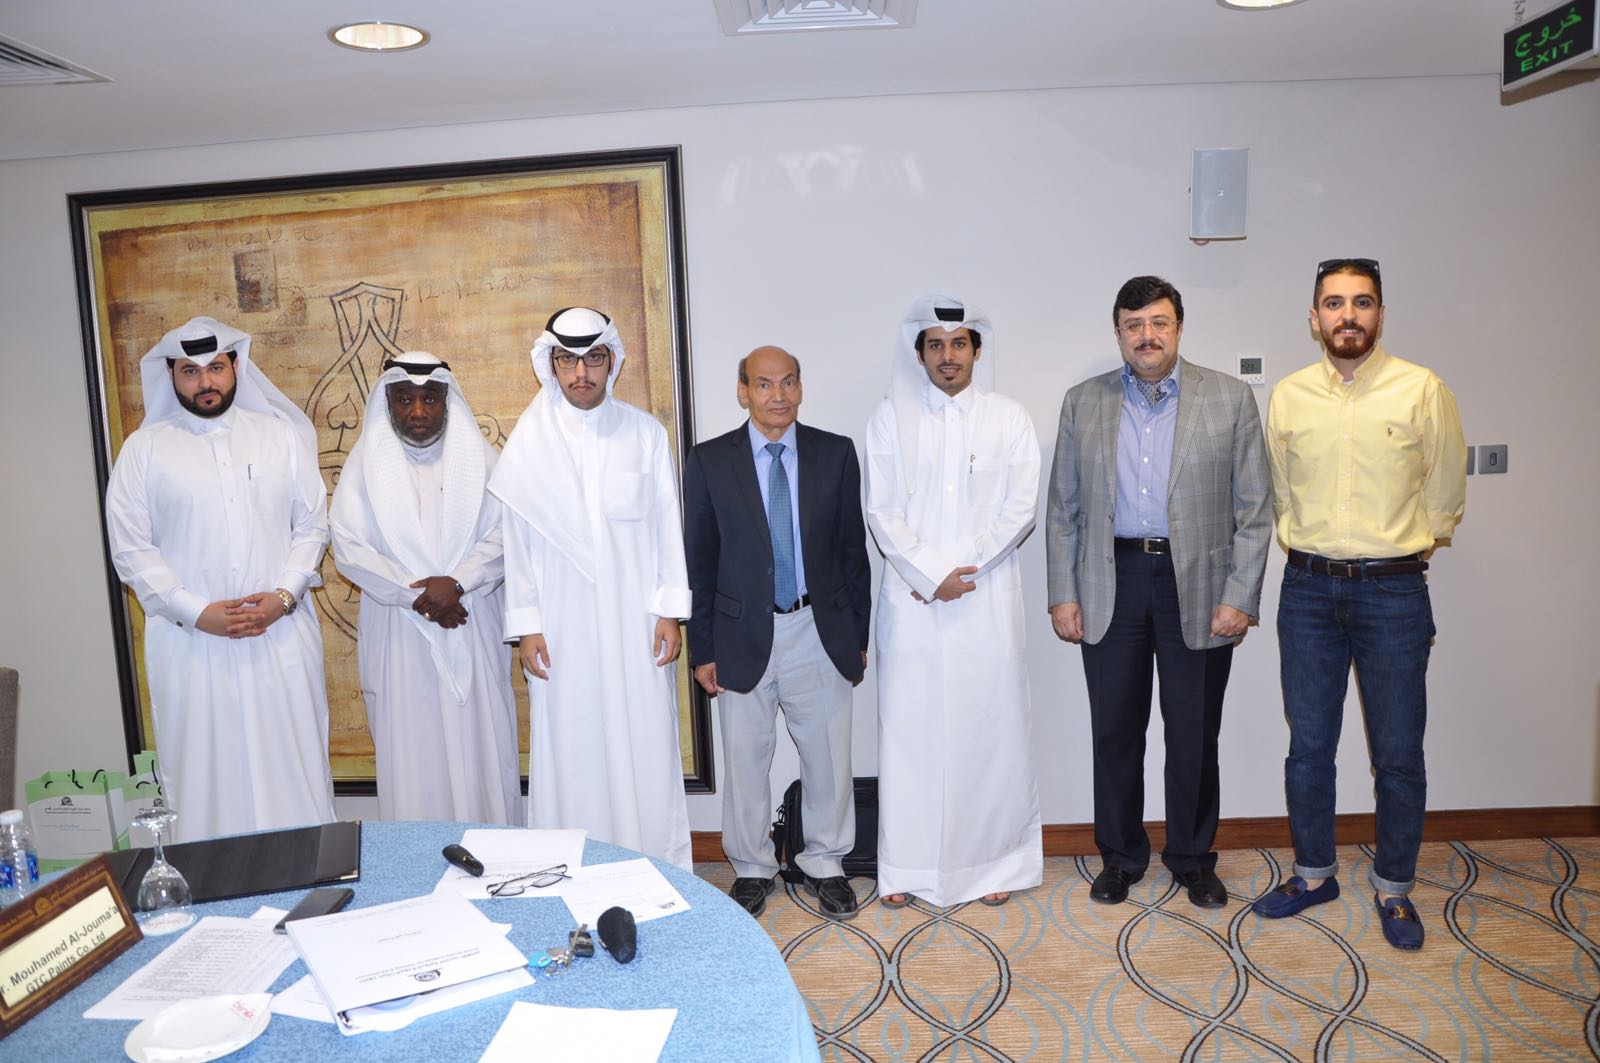  GOIC concluded the “occupational safety” training course that was held in Kuwait with the participation of specialists